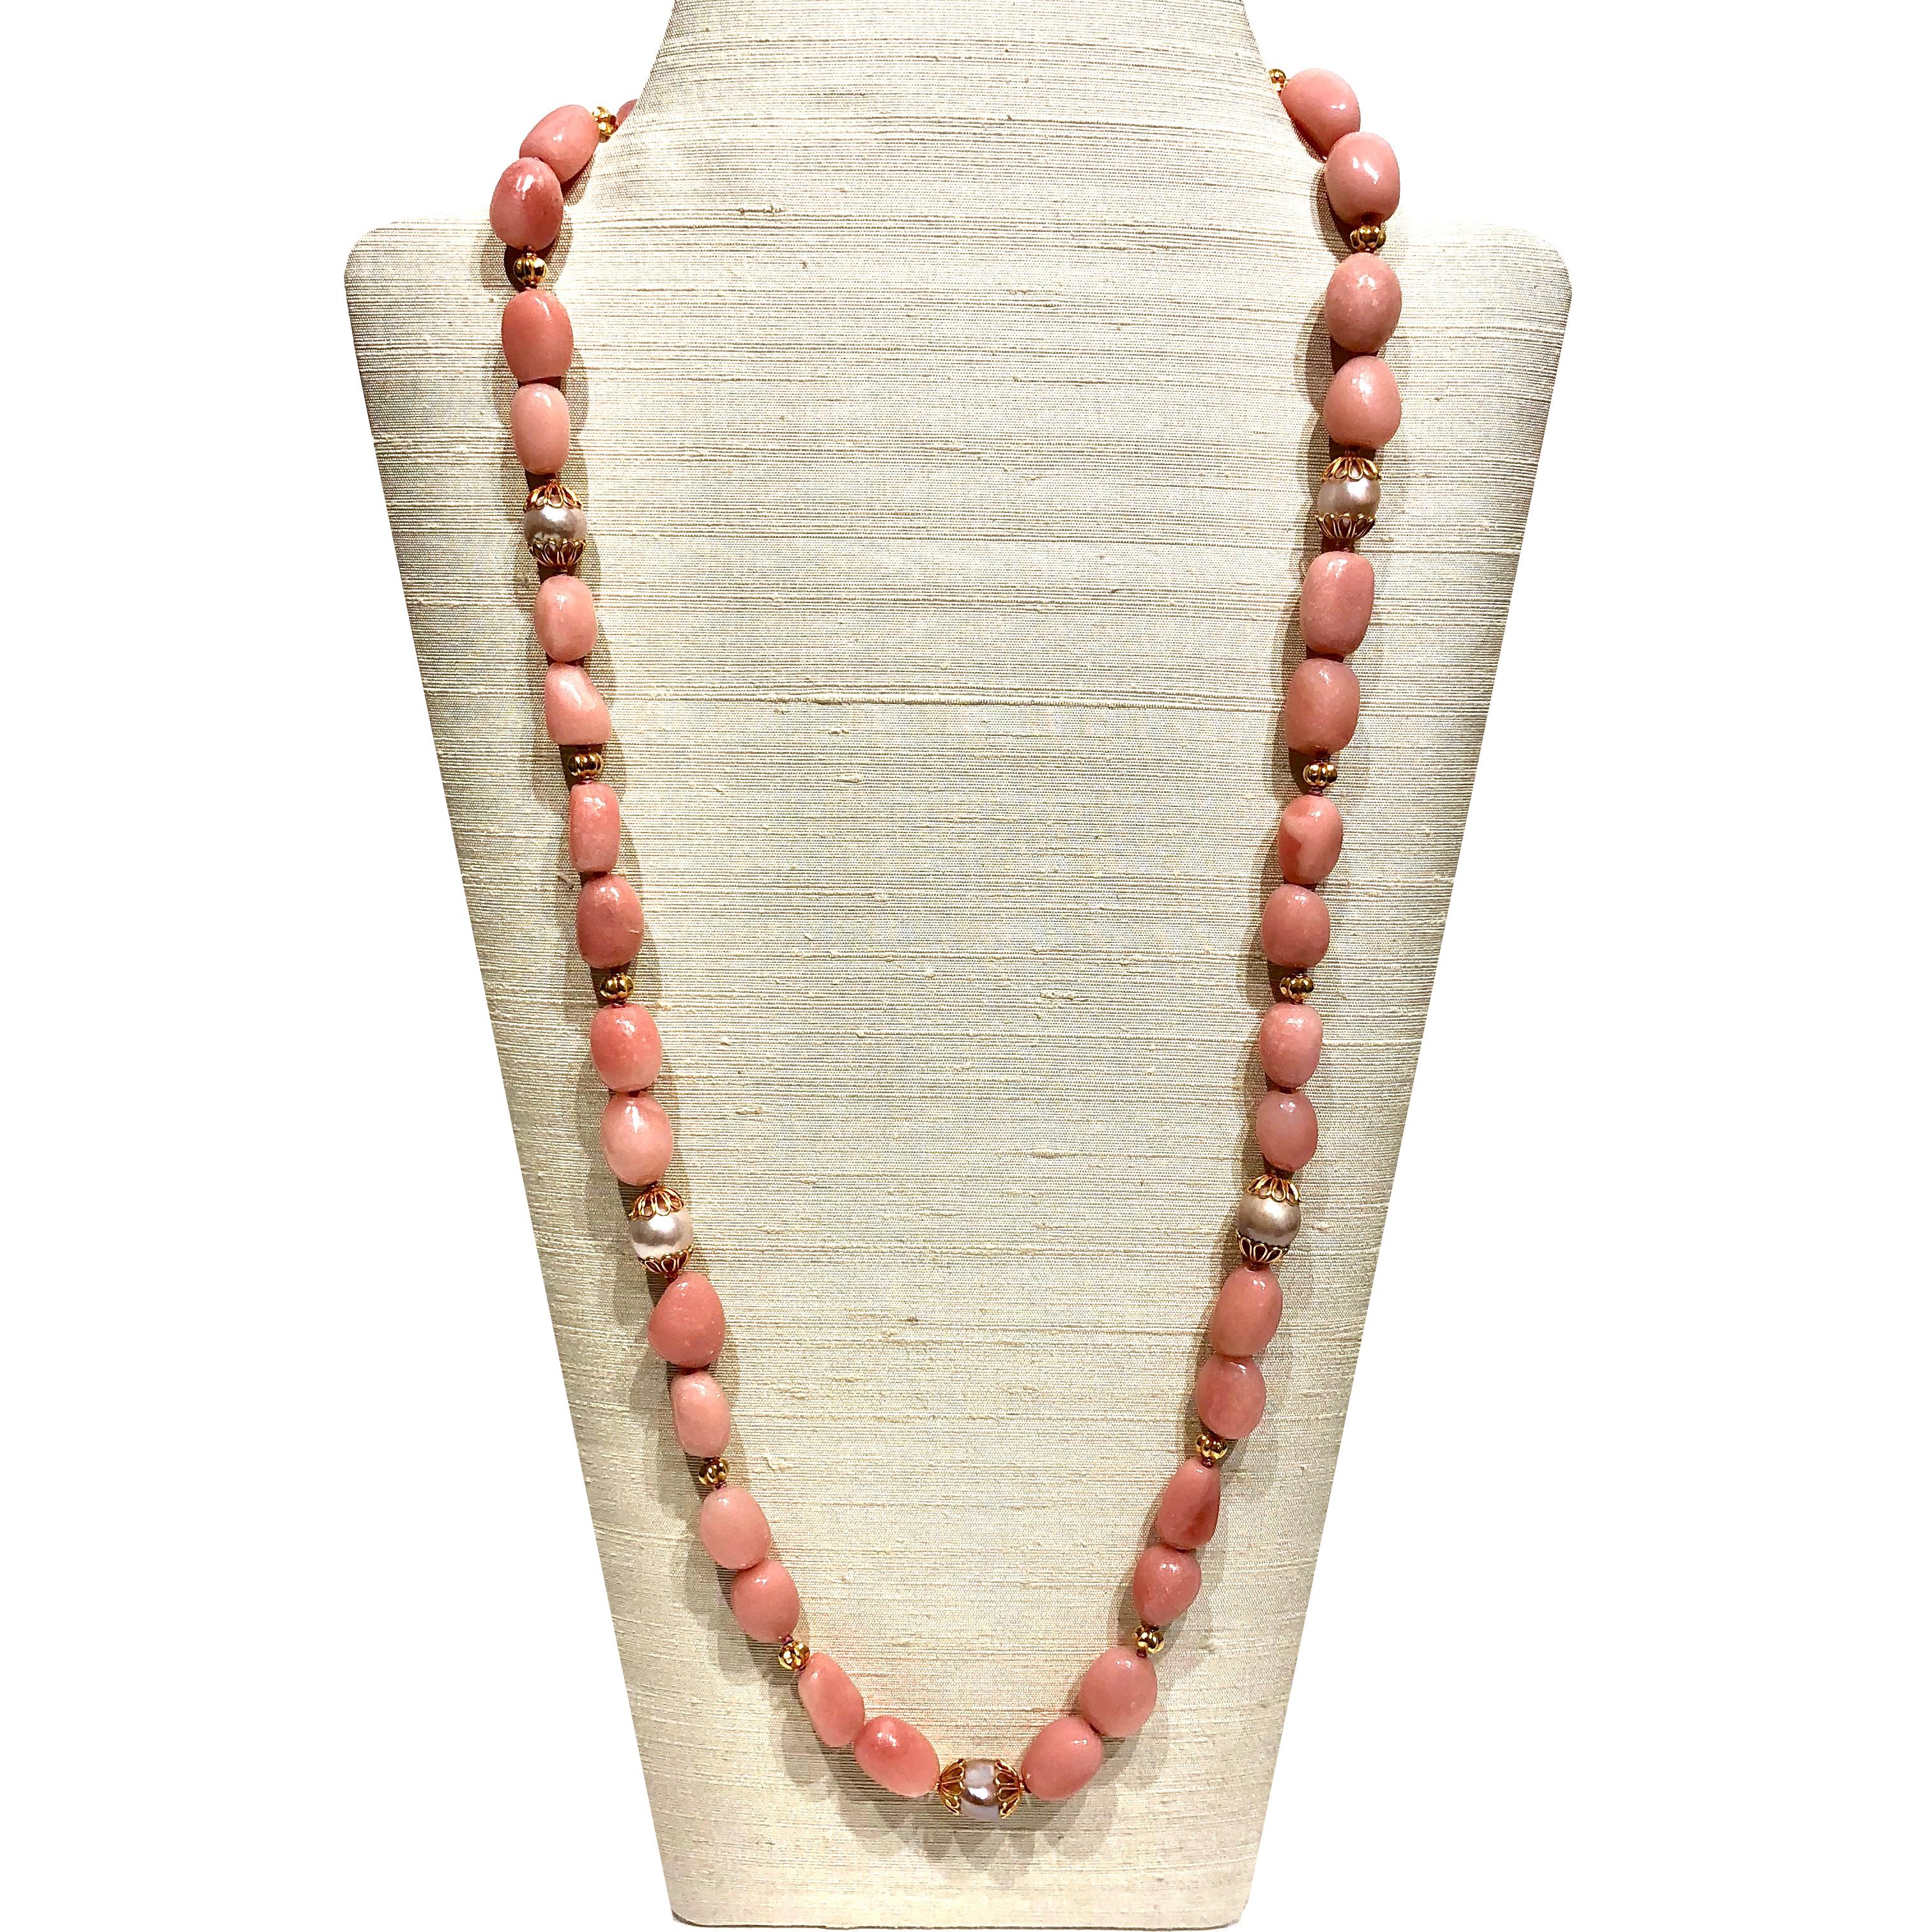 33.5 in (85 cm) long necklace with pink aragonite beads, freshwater pearls and 18k gold beads & clasp.

An elegant necklace with beautiful pink aragonite & pink-toned freshwater pearls is a perfect summer accessary.
